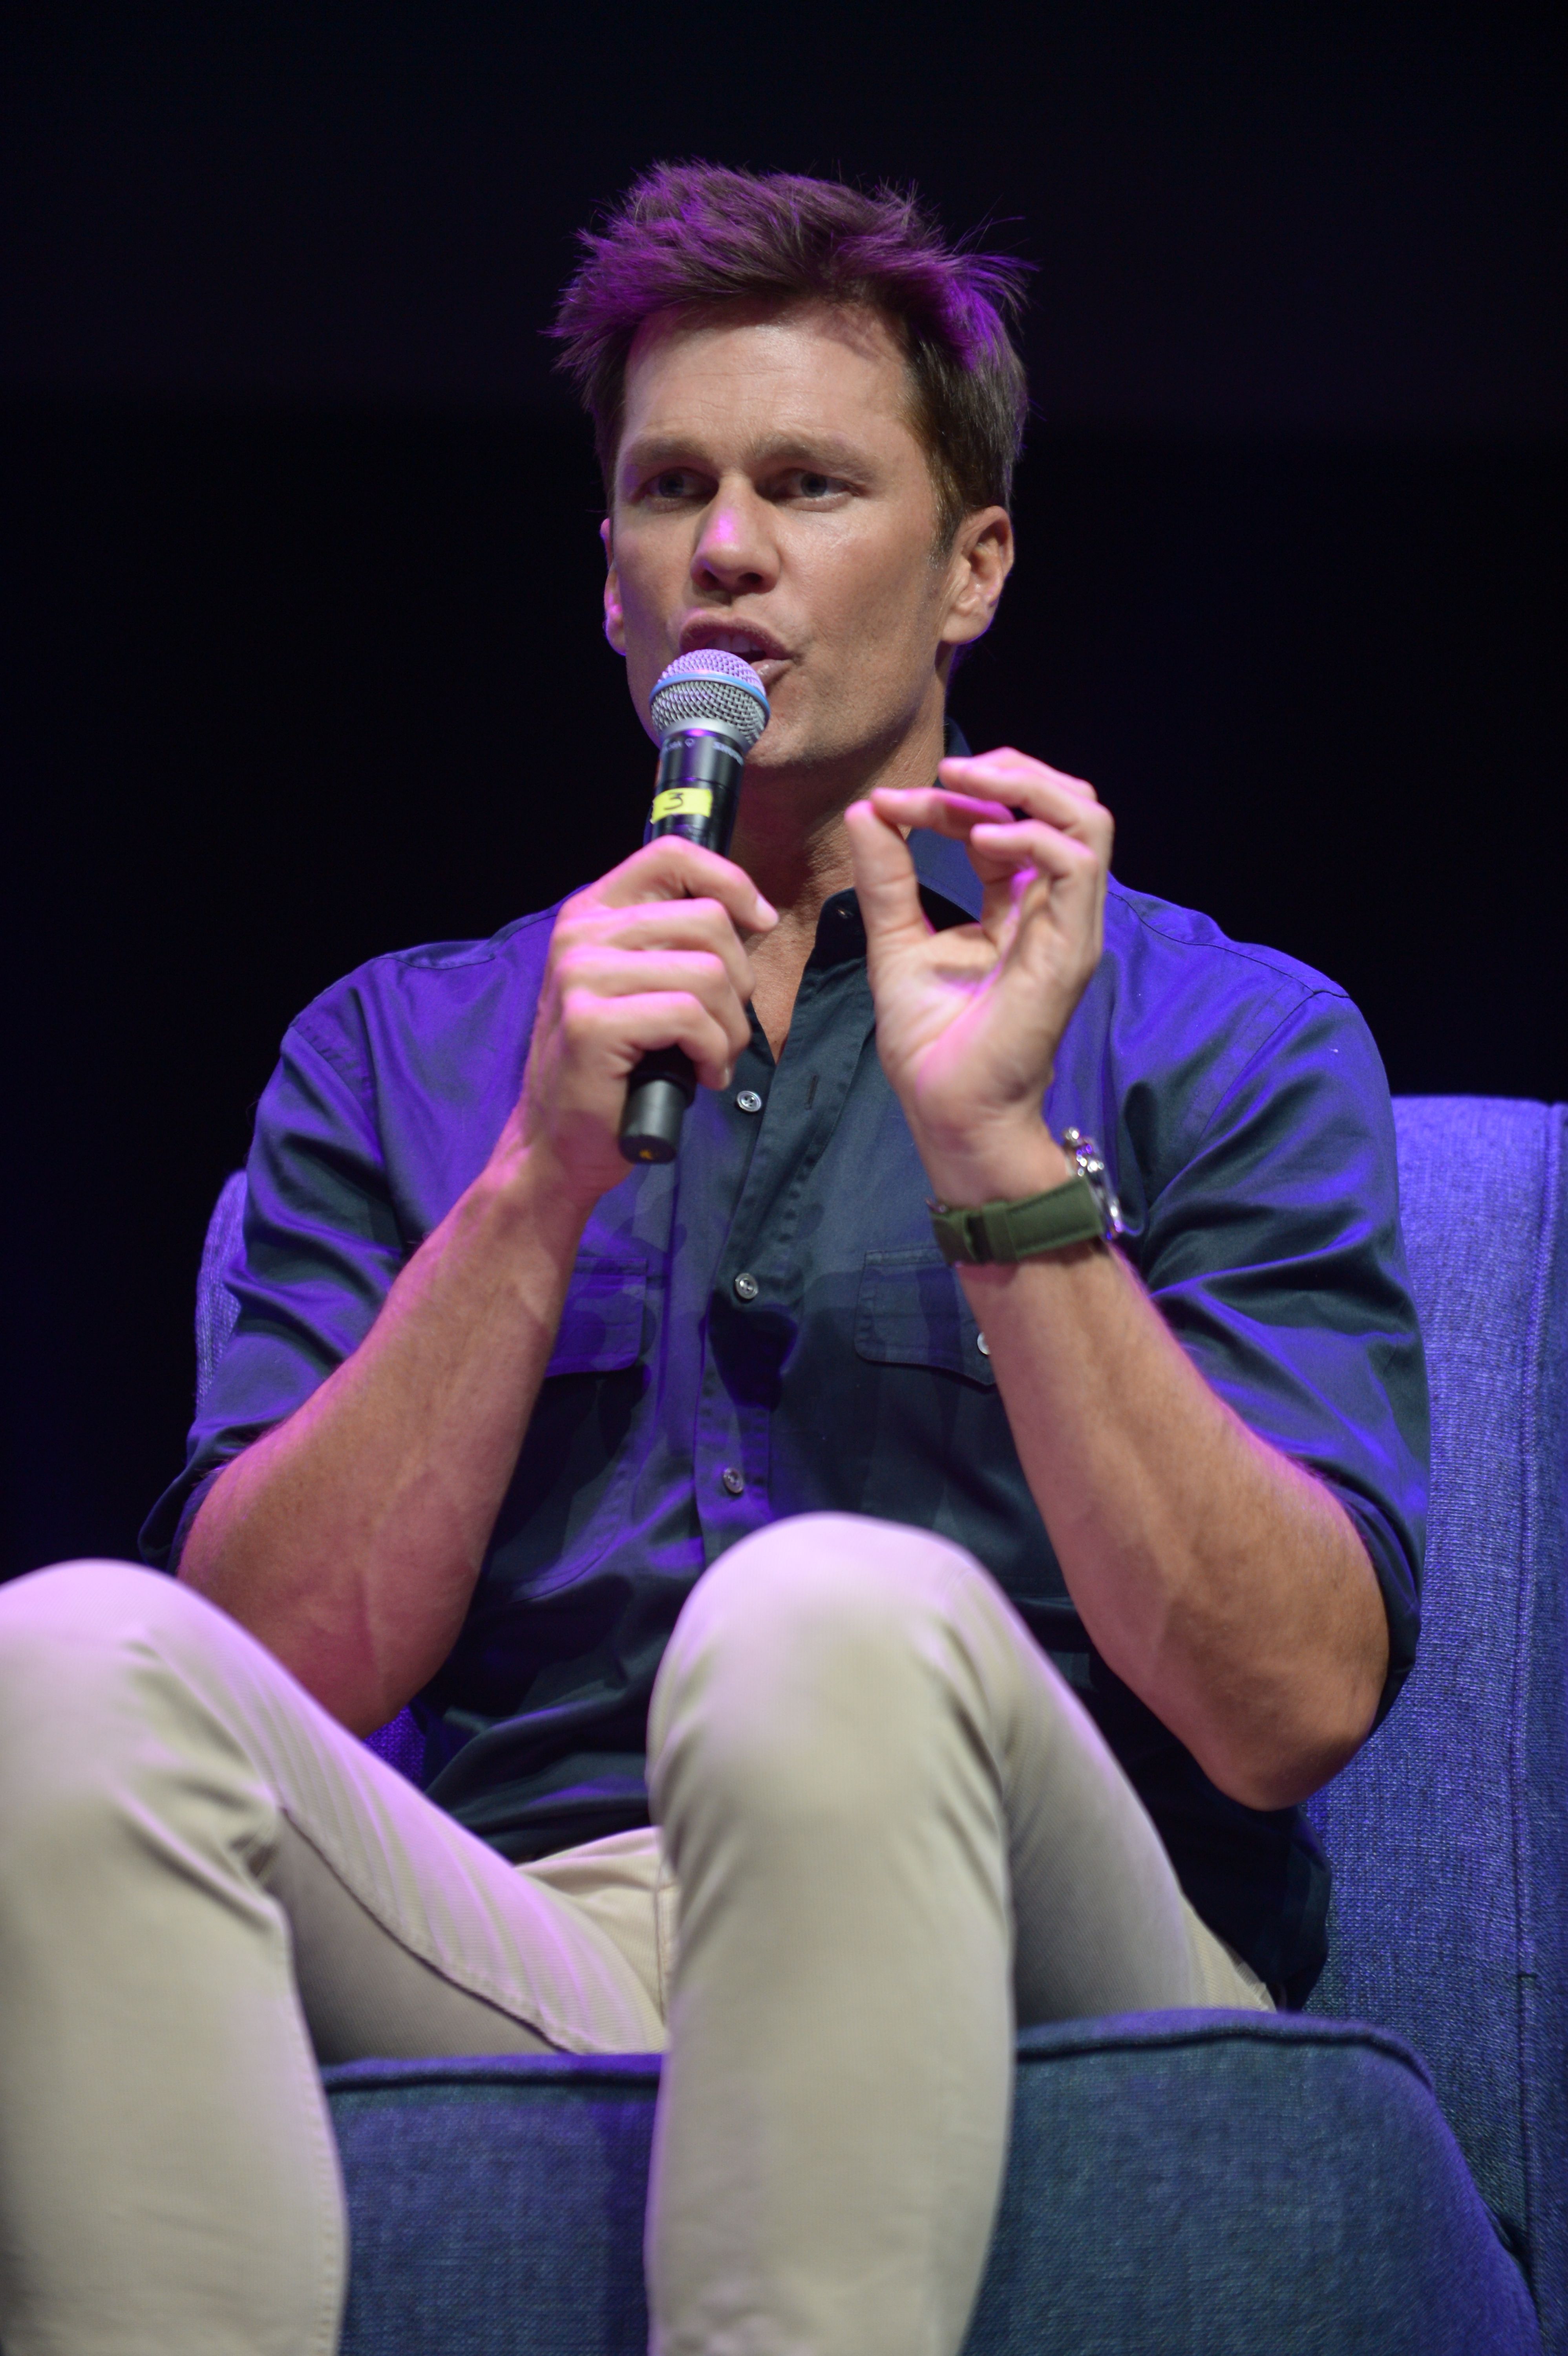 Brady recently said he wouldn't be opposed to coming out of retirement